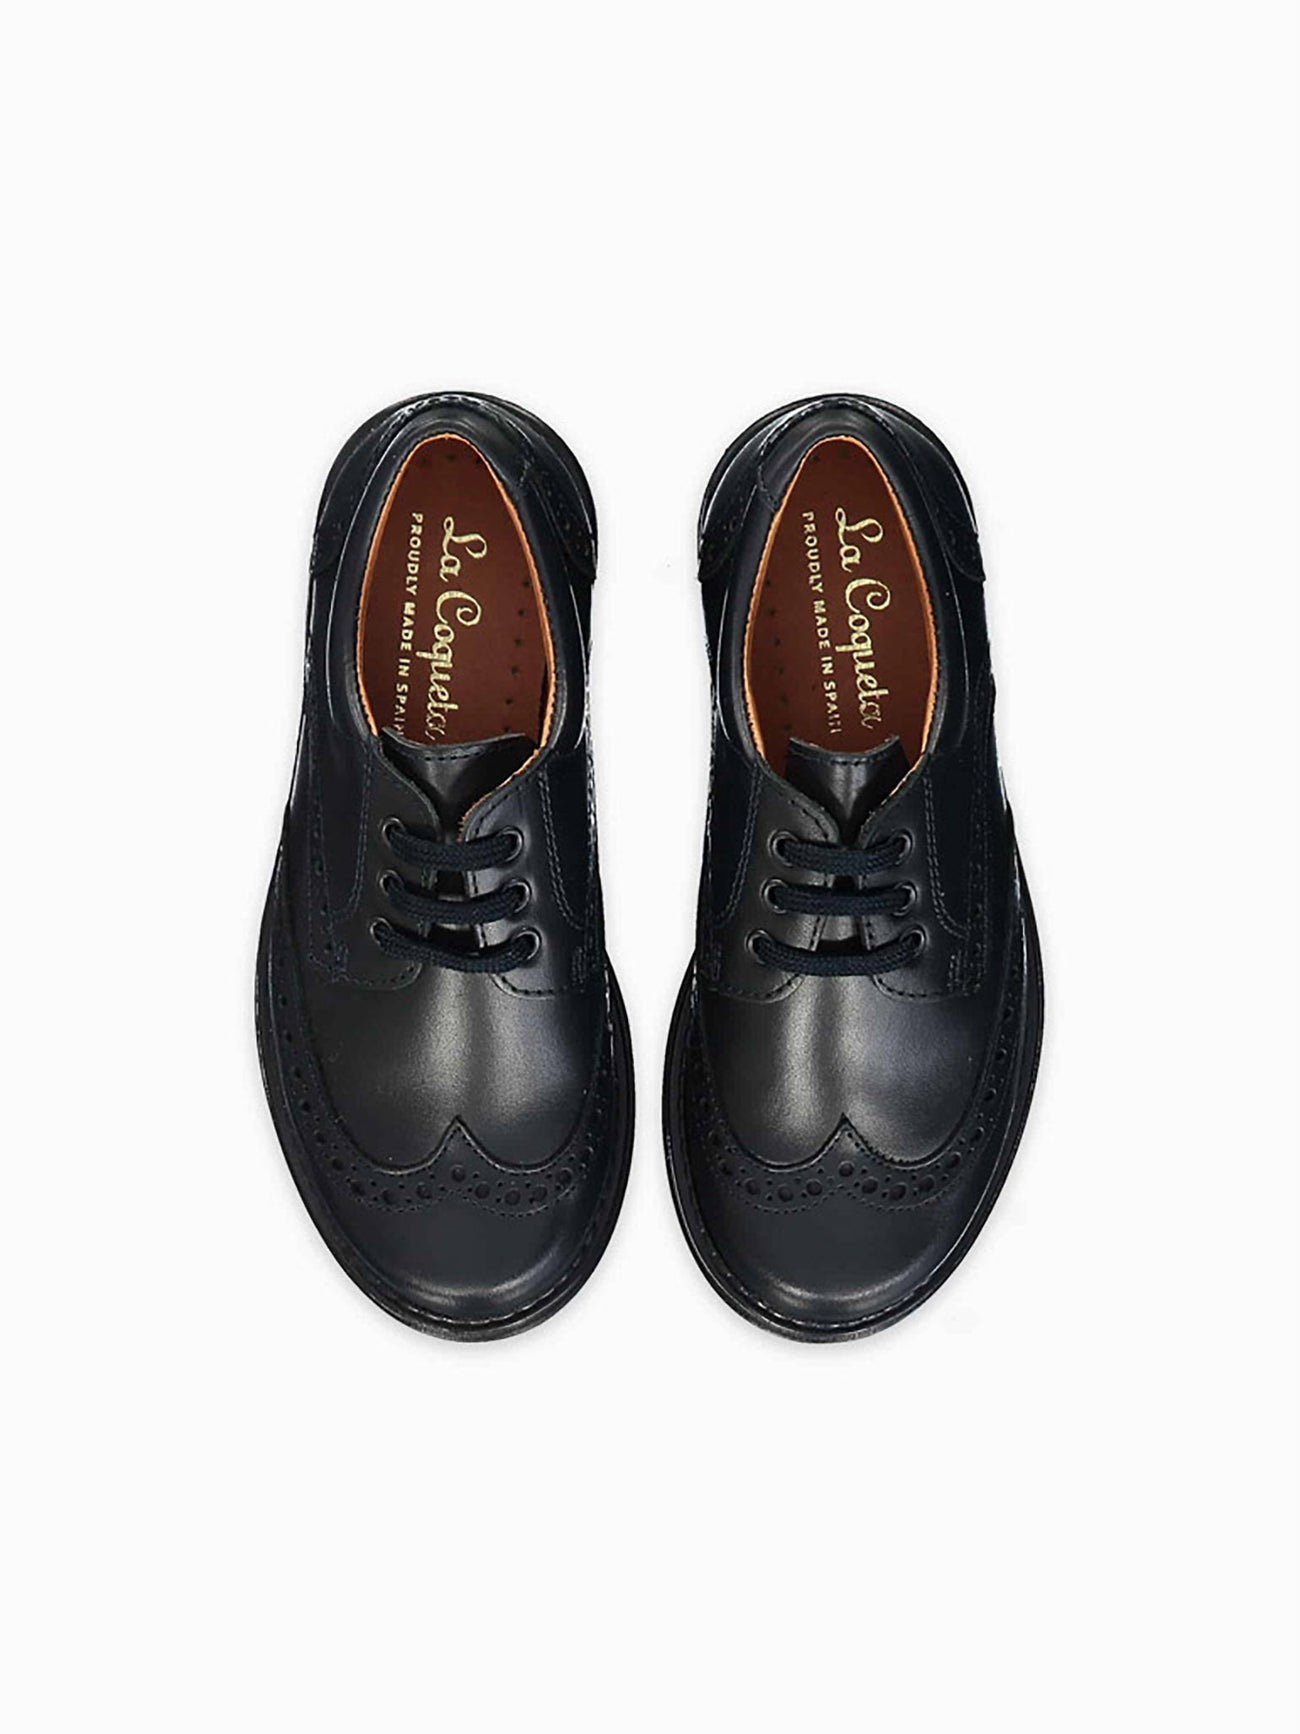 Black Leather Lace Up School Shoes